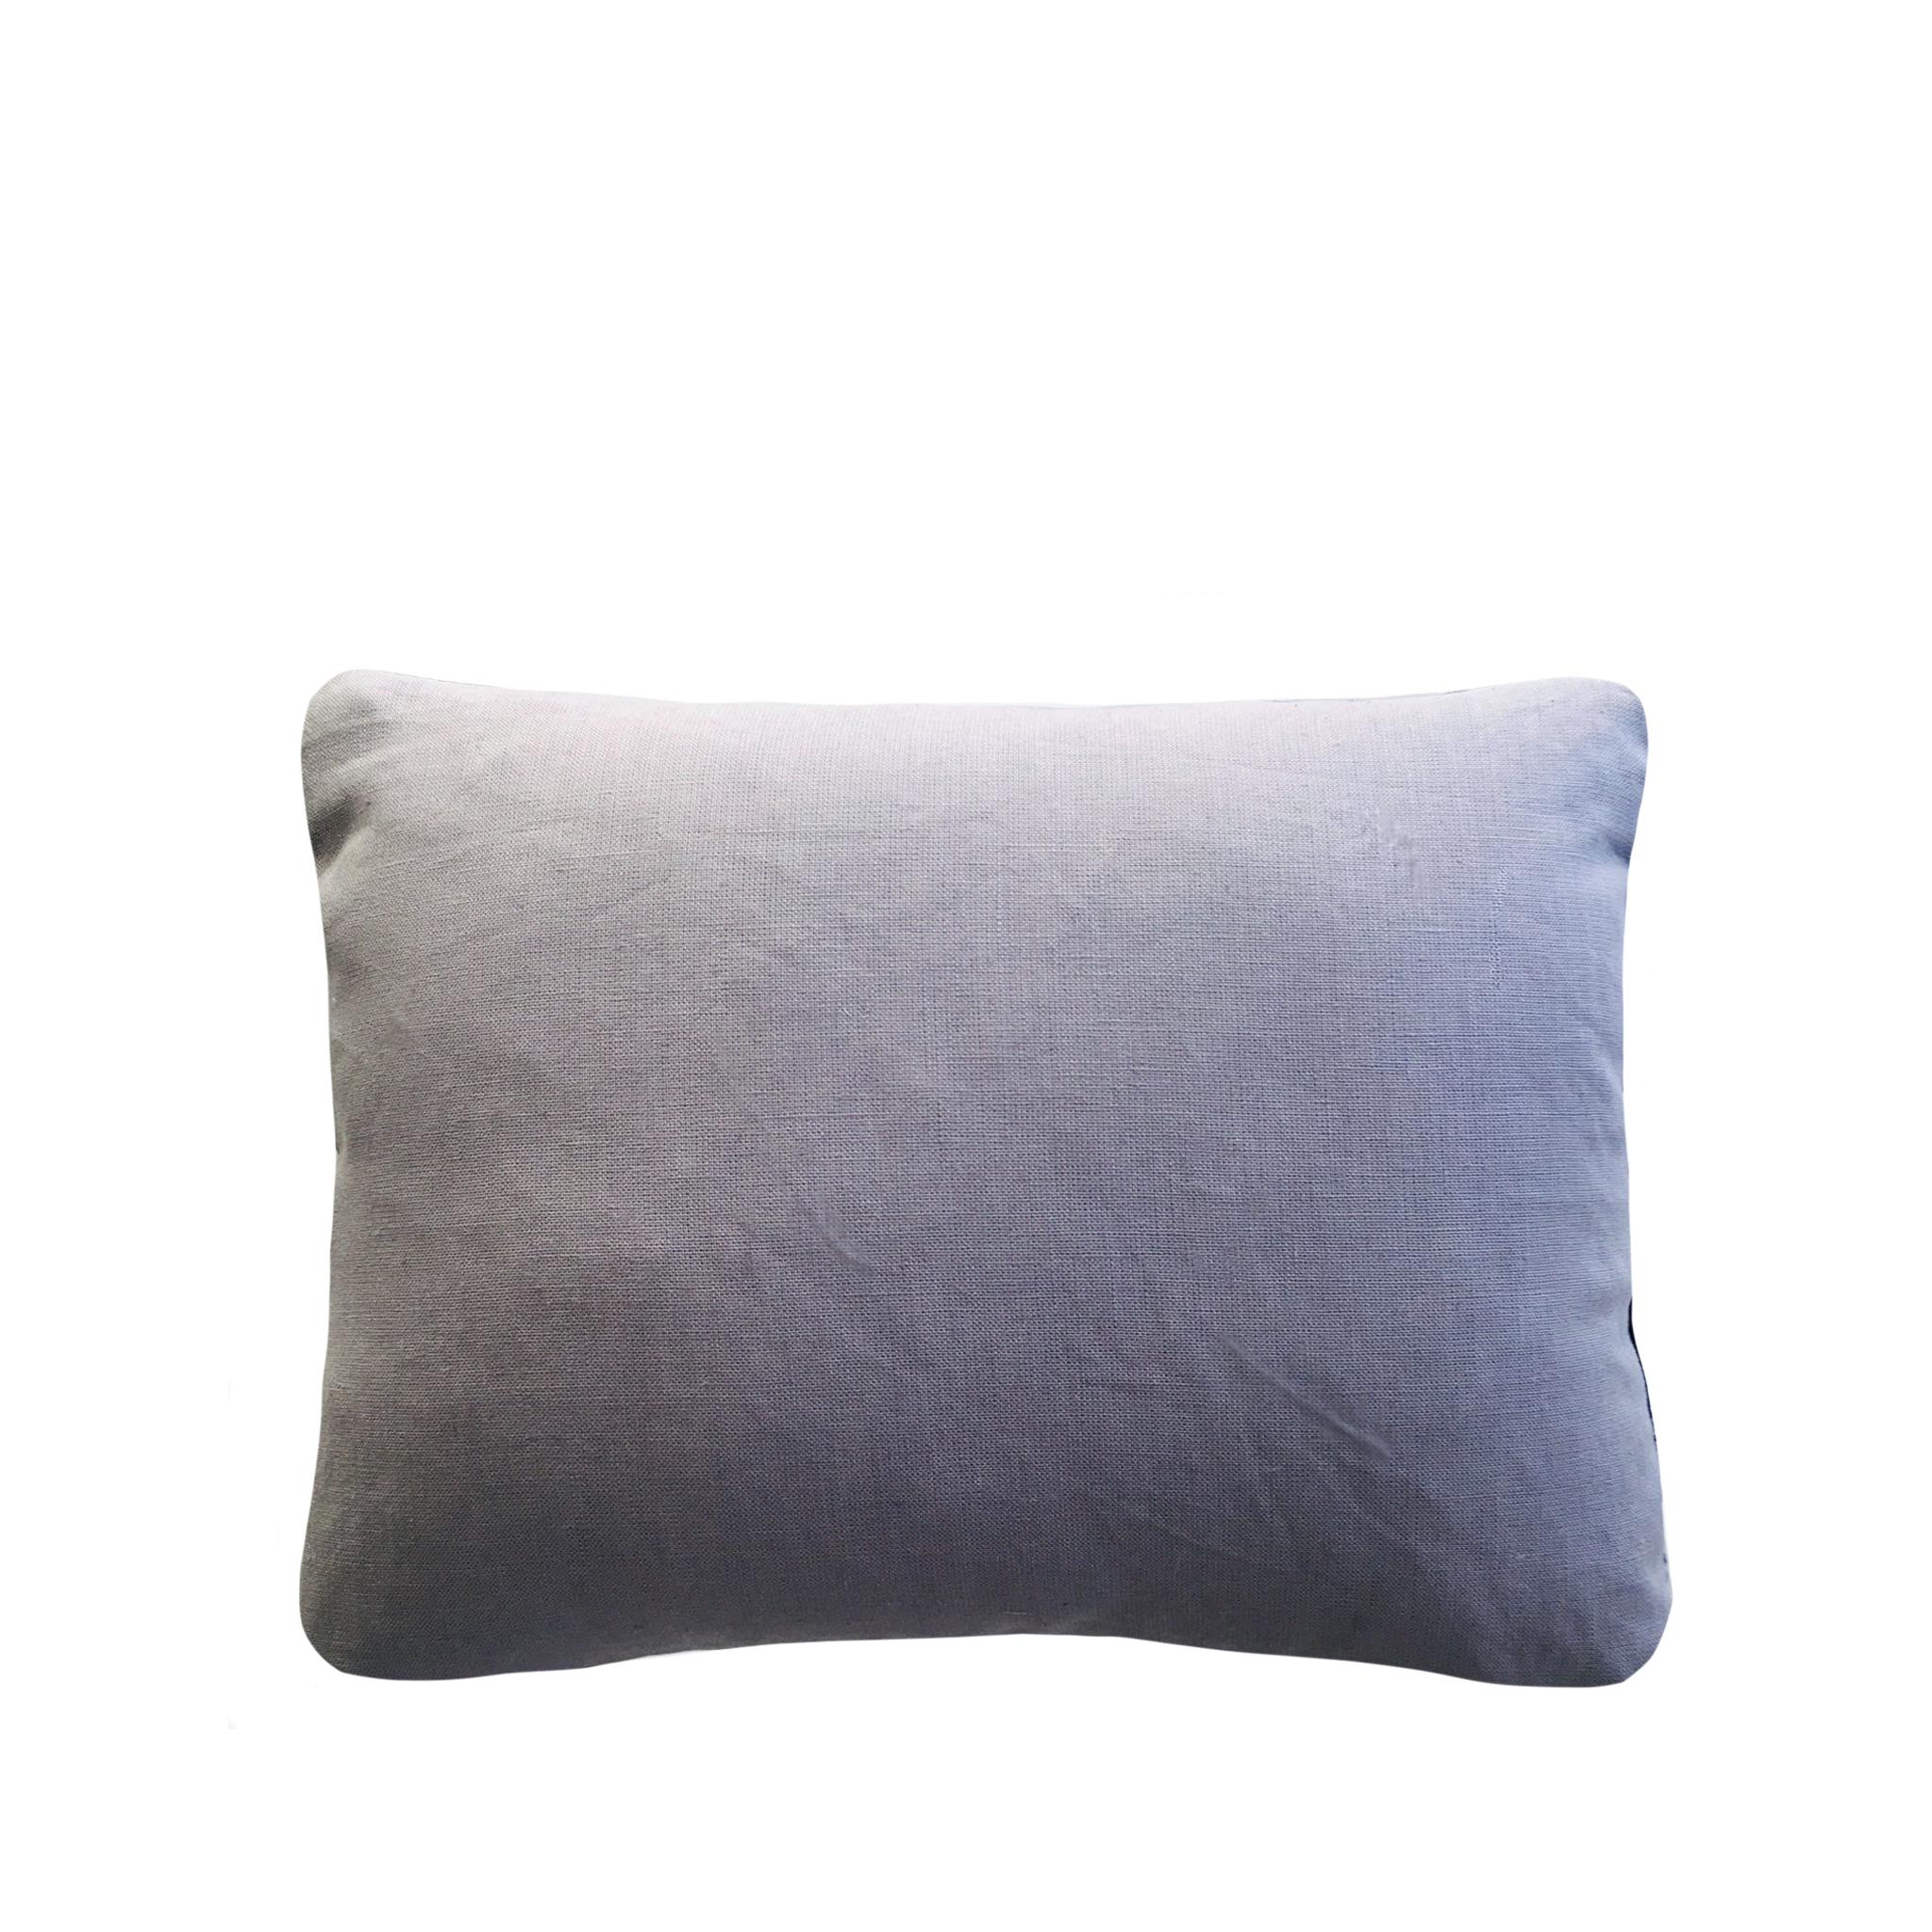 Rose velvet cushion dyed with indigo in Ripple pattern with grey linen backing. Hand-dyed and sewn in New York City, down pillow insert made locally in NYC. Pillow measures 12 x 16 inches. Each velvet cushion is hand made and one of a kind.

Custom